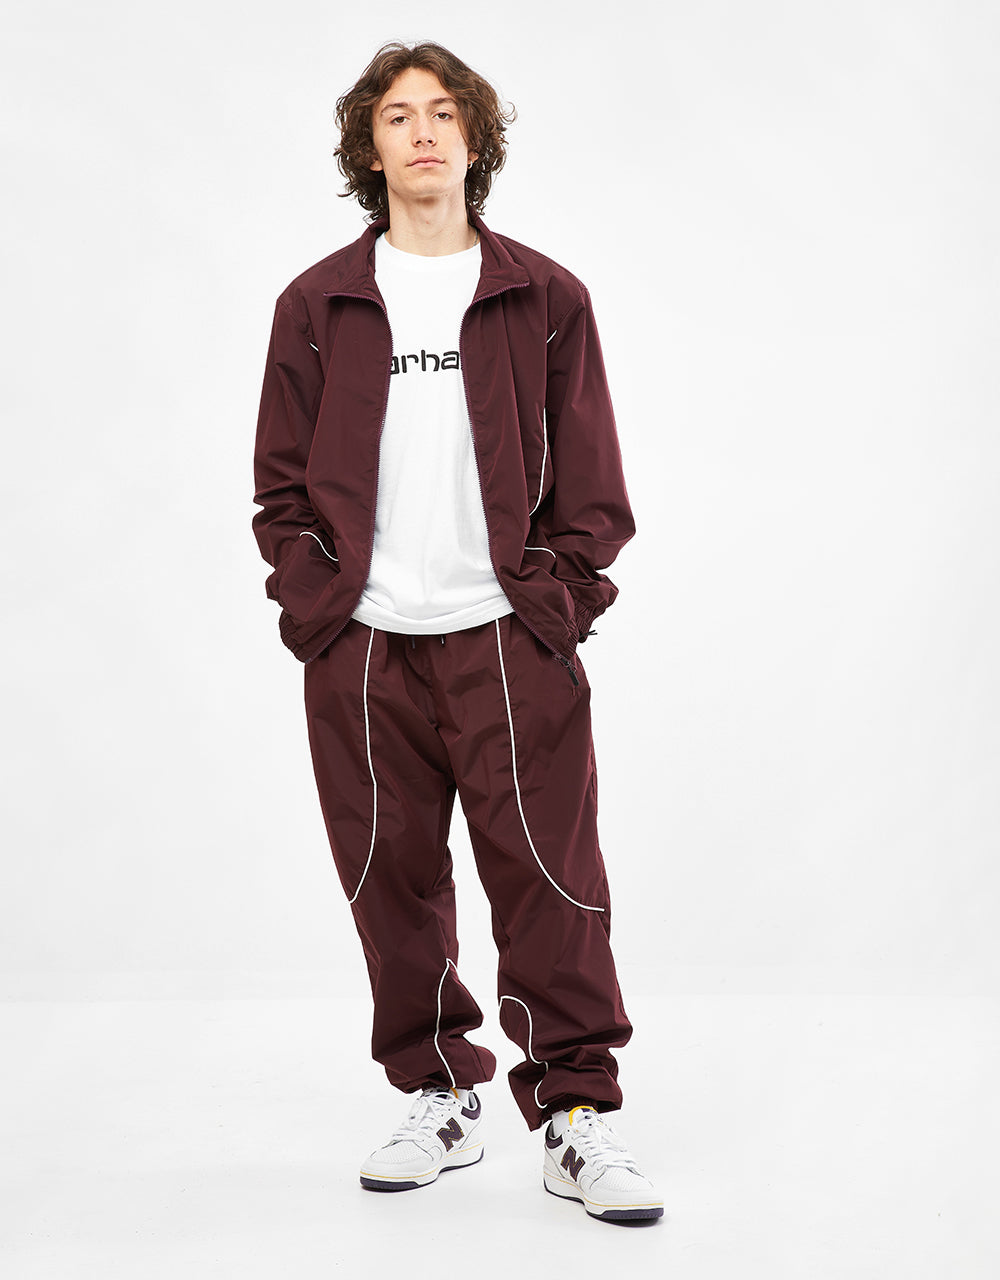 Route One Apex Track Pant - Nut Brown/Cream